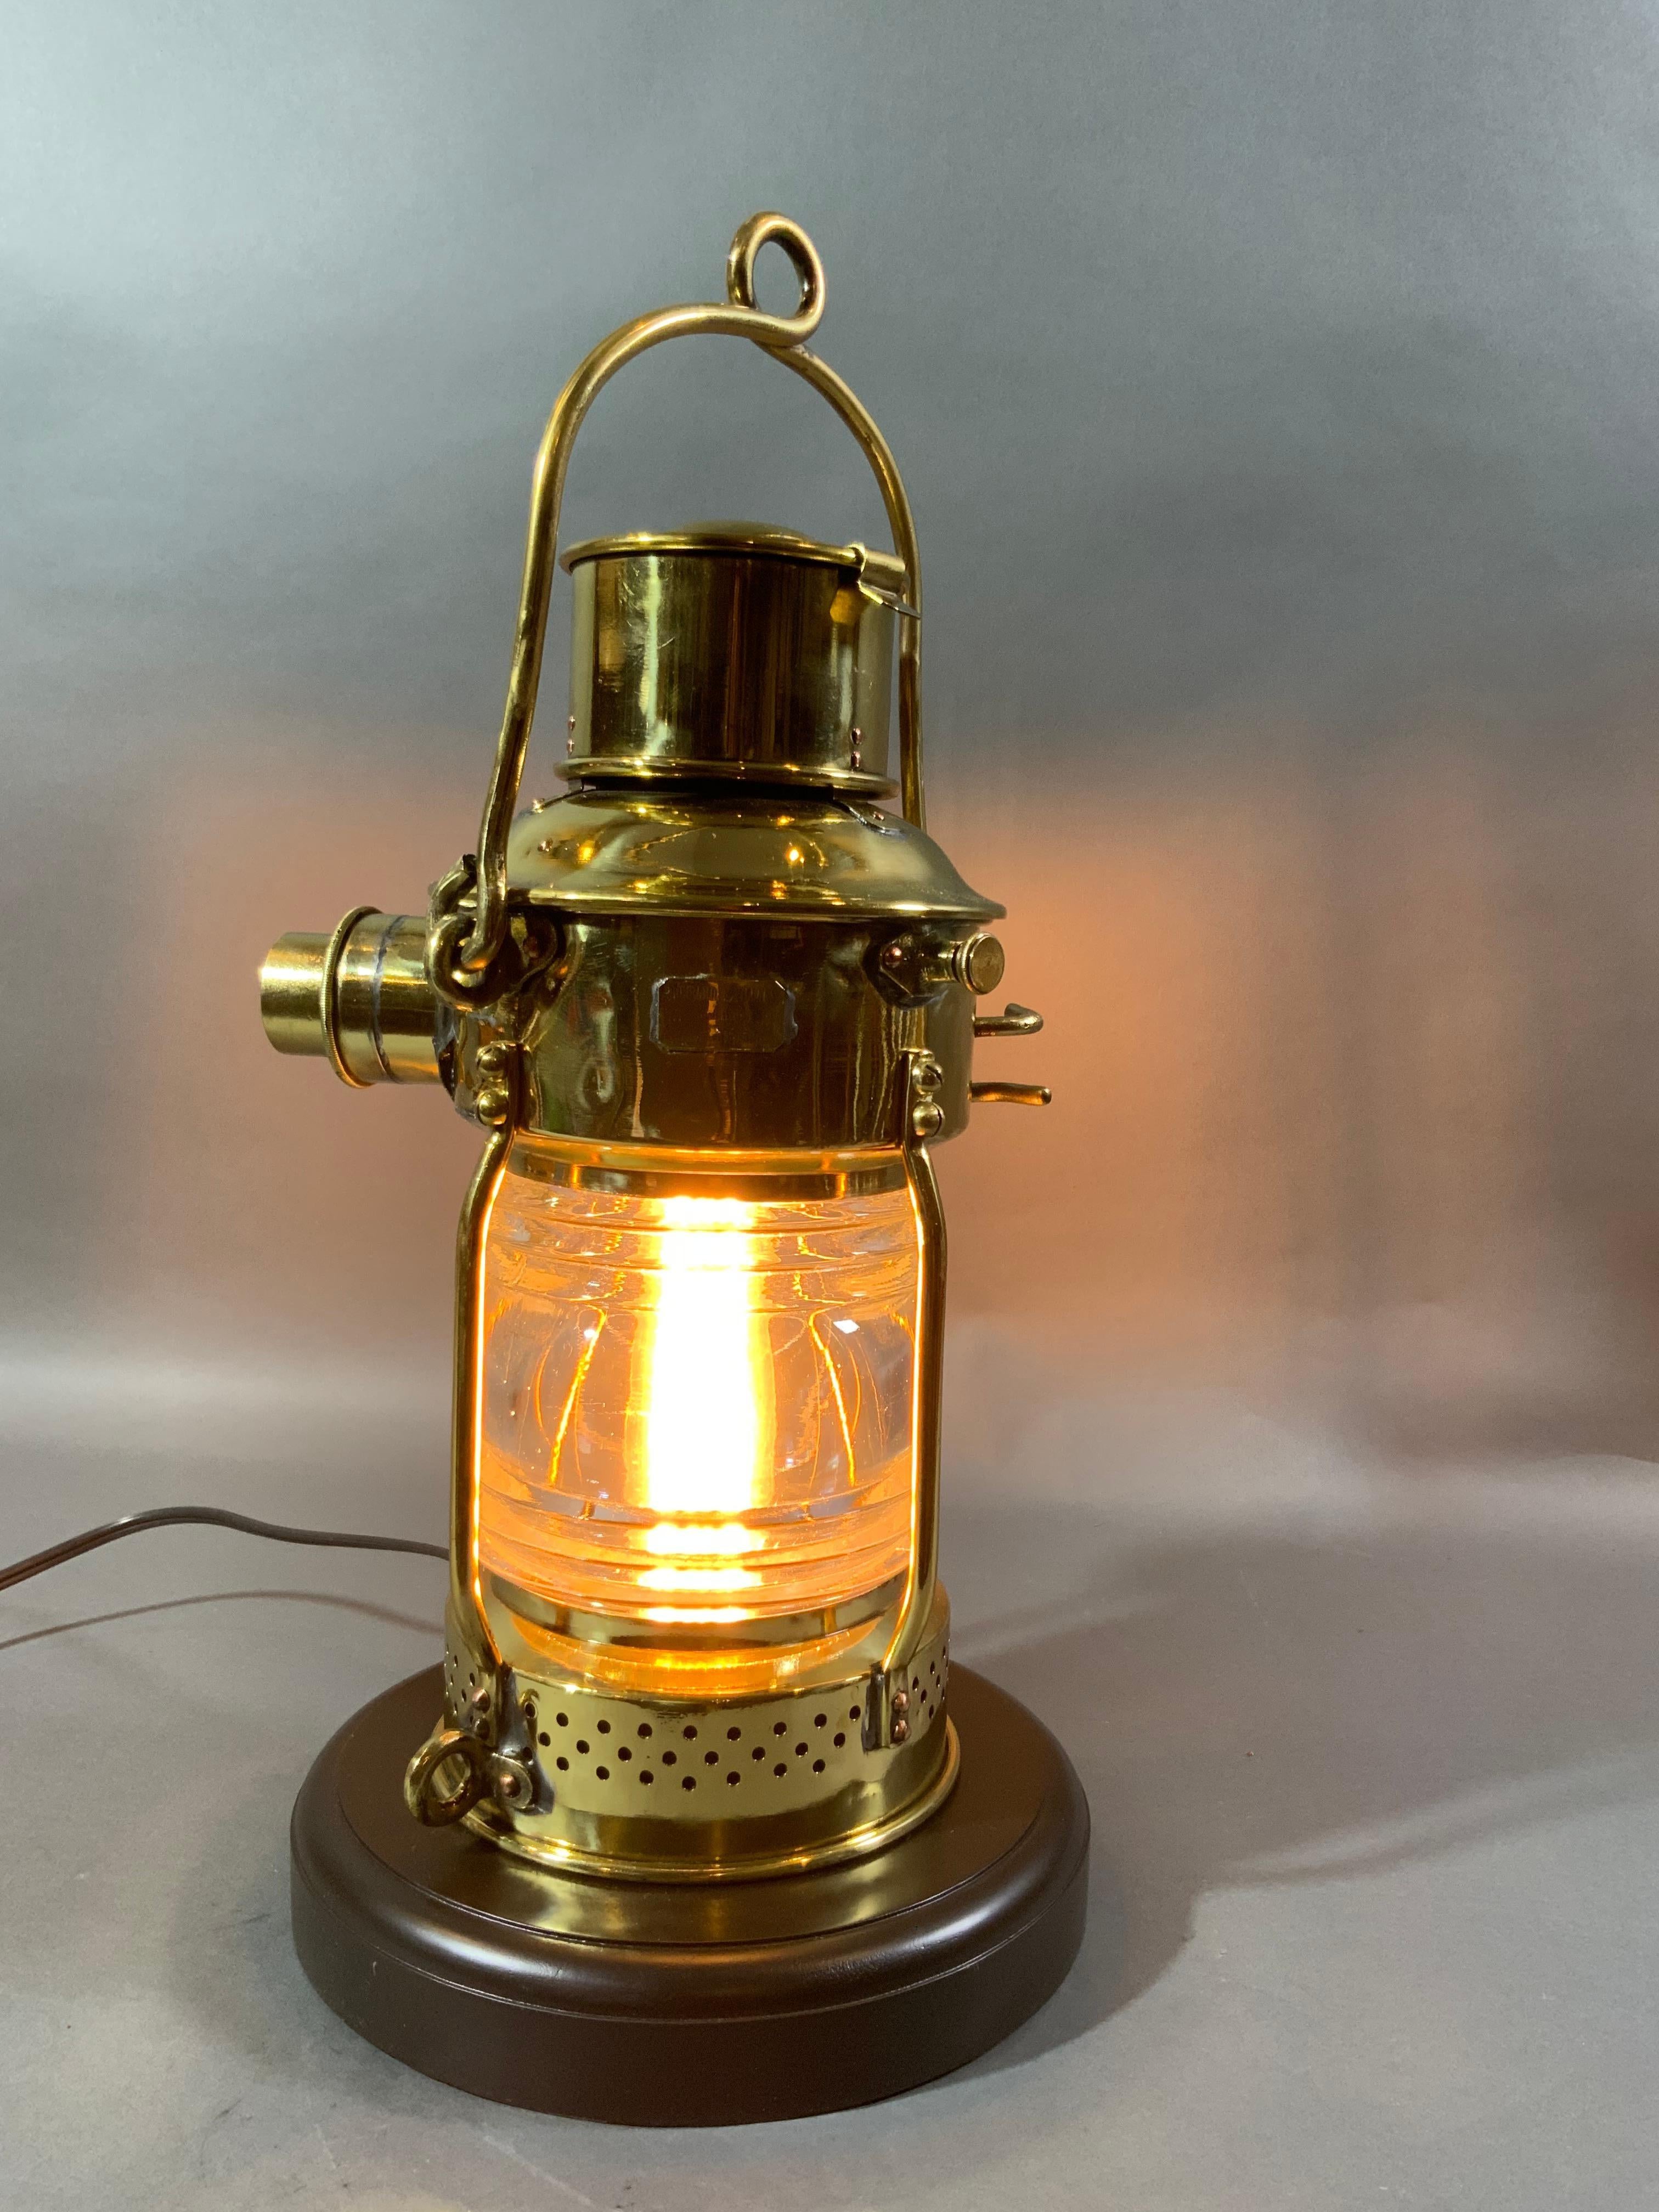 Polished Antique Ships Anchor Lantern by French Maker For Sale